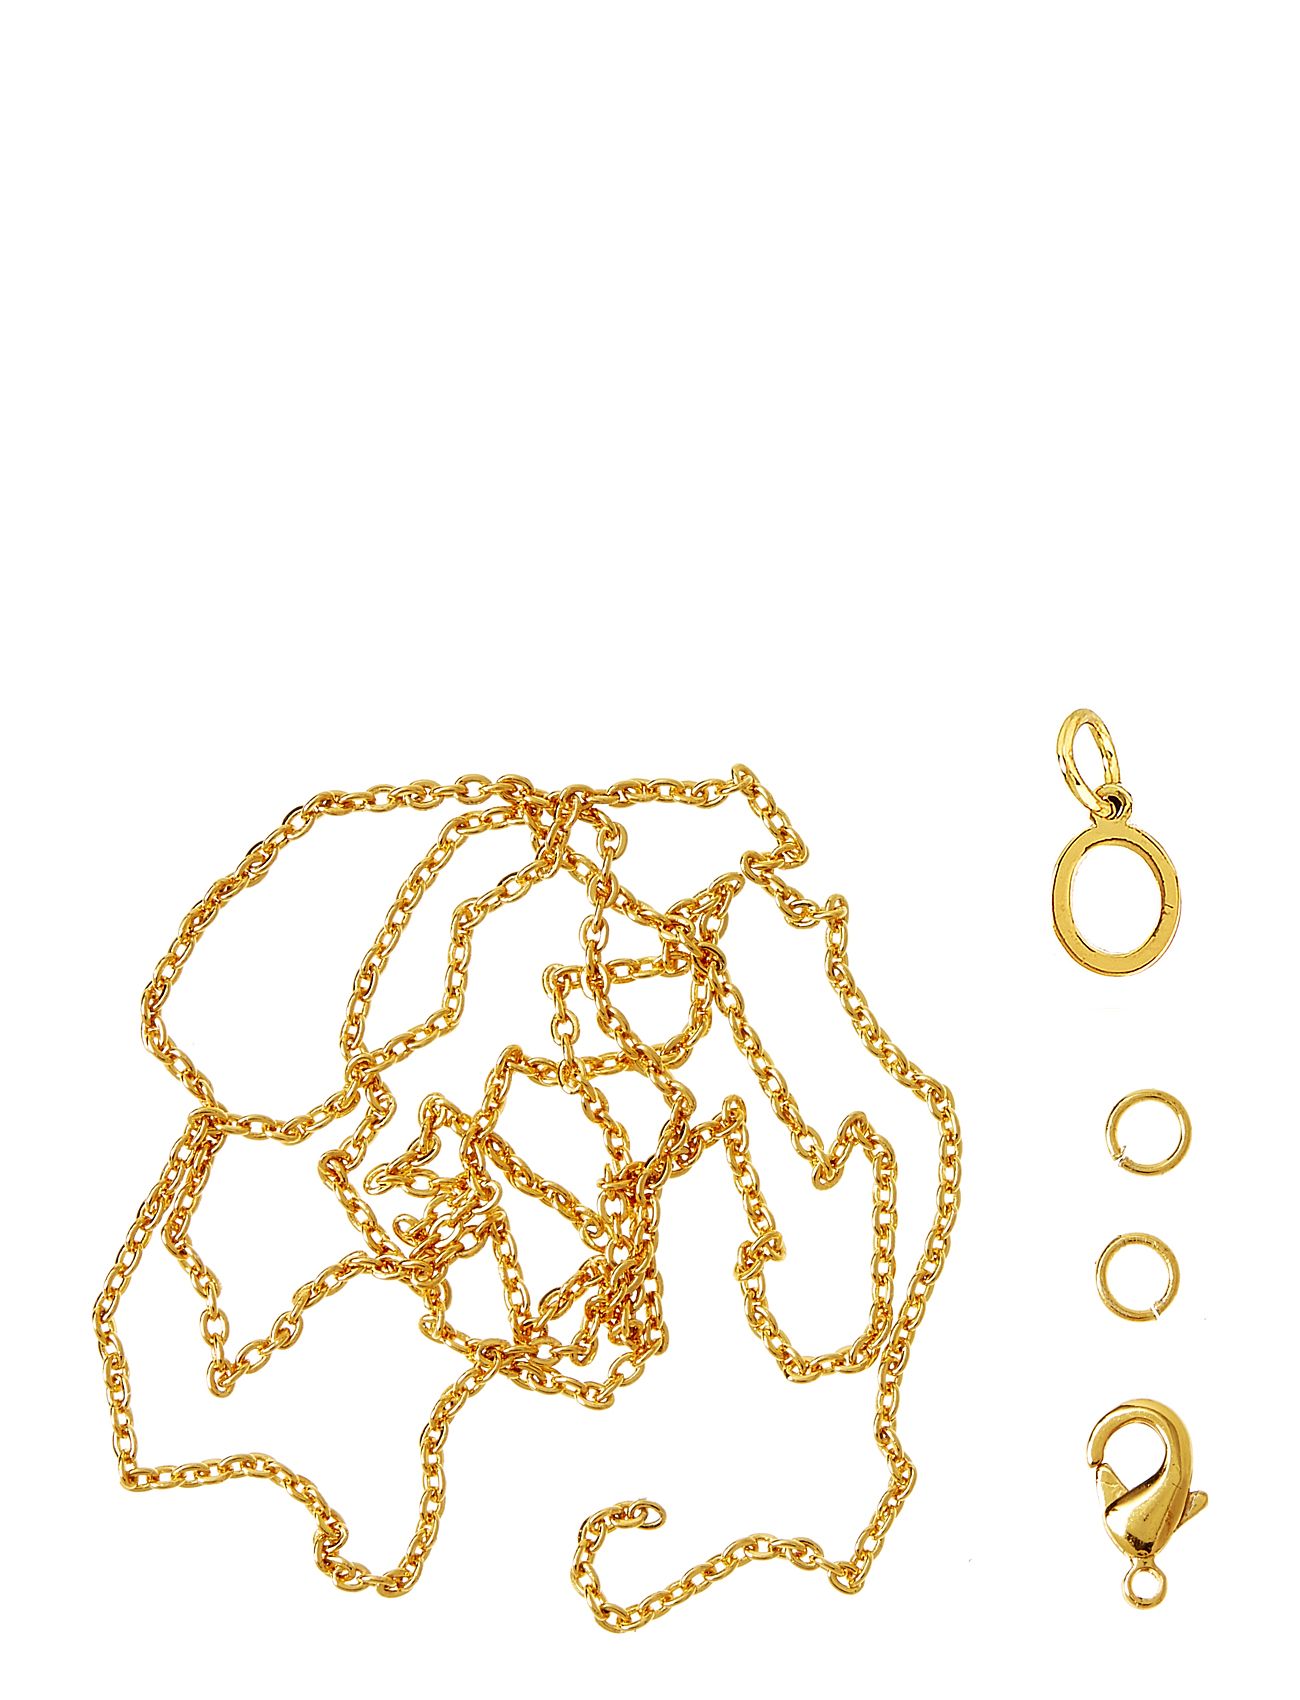 Letter O Gp With O-Ring, Chain And Clasp Toys Creativity Drawing & Crafts Craft Jewellery & Accessories Gold Me & My Box